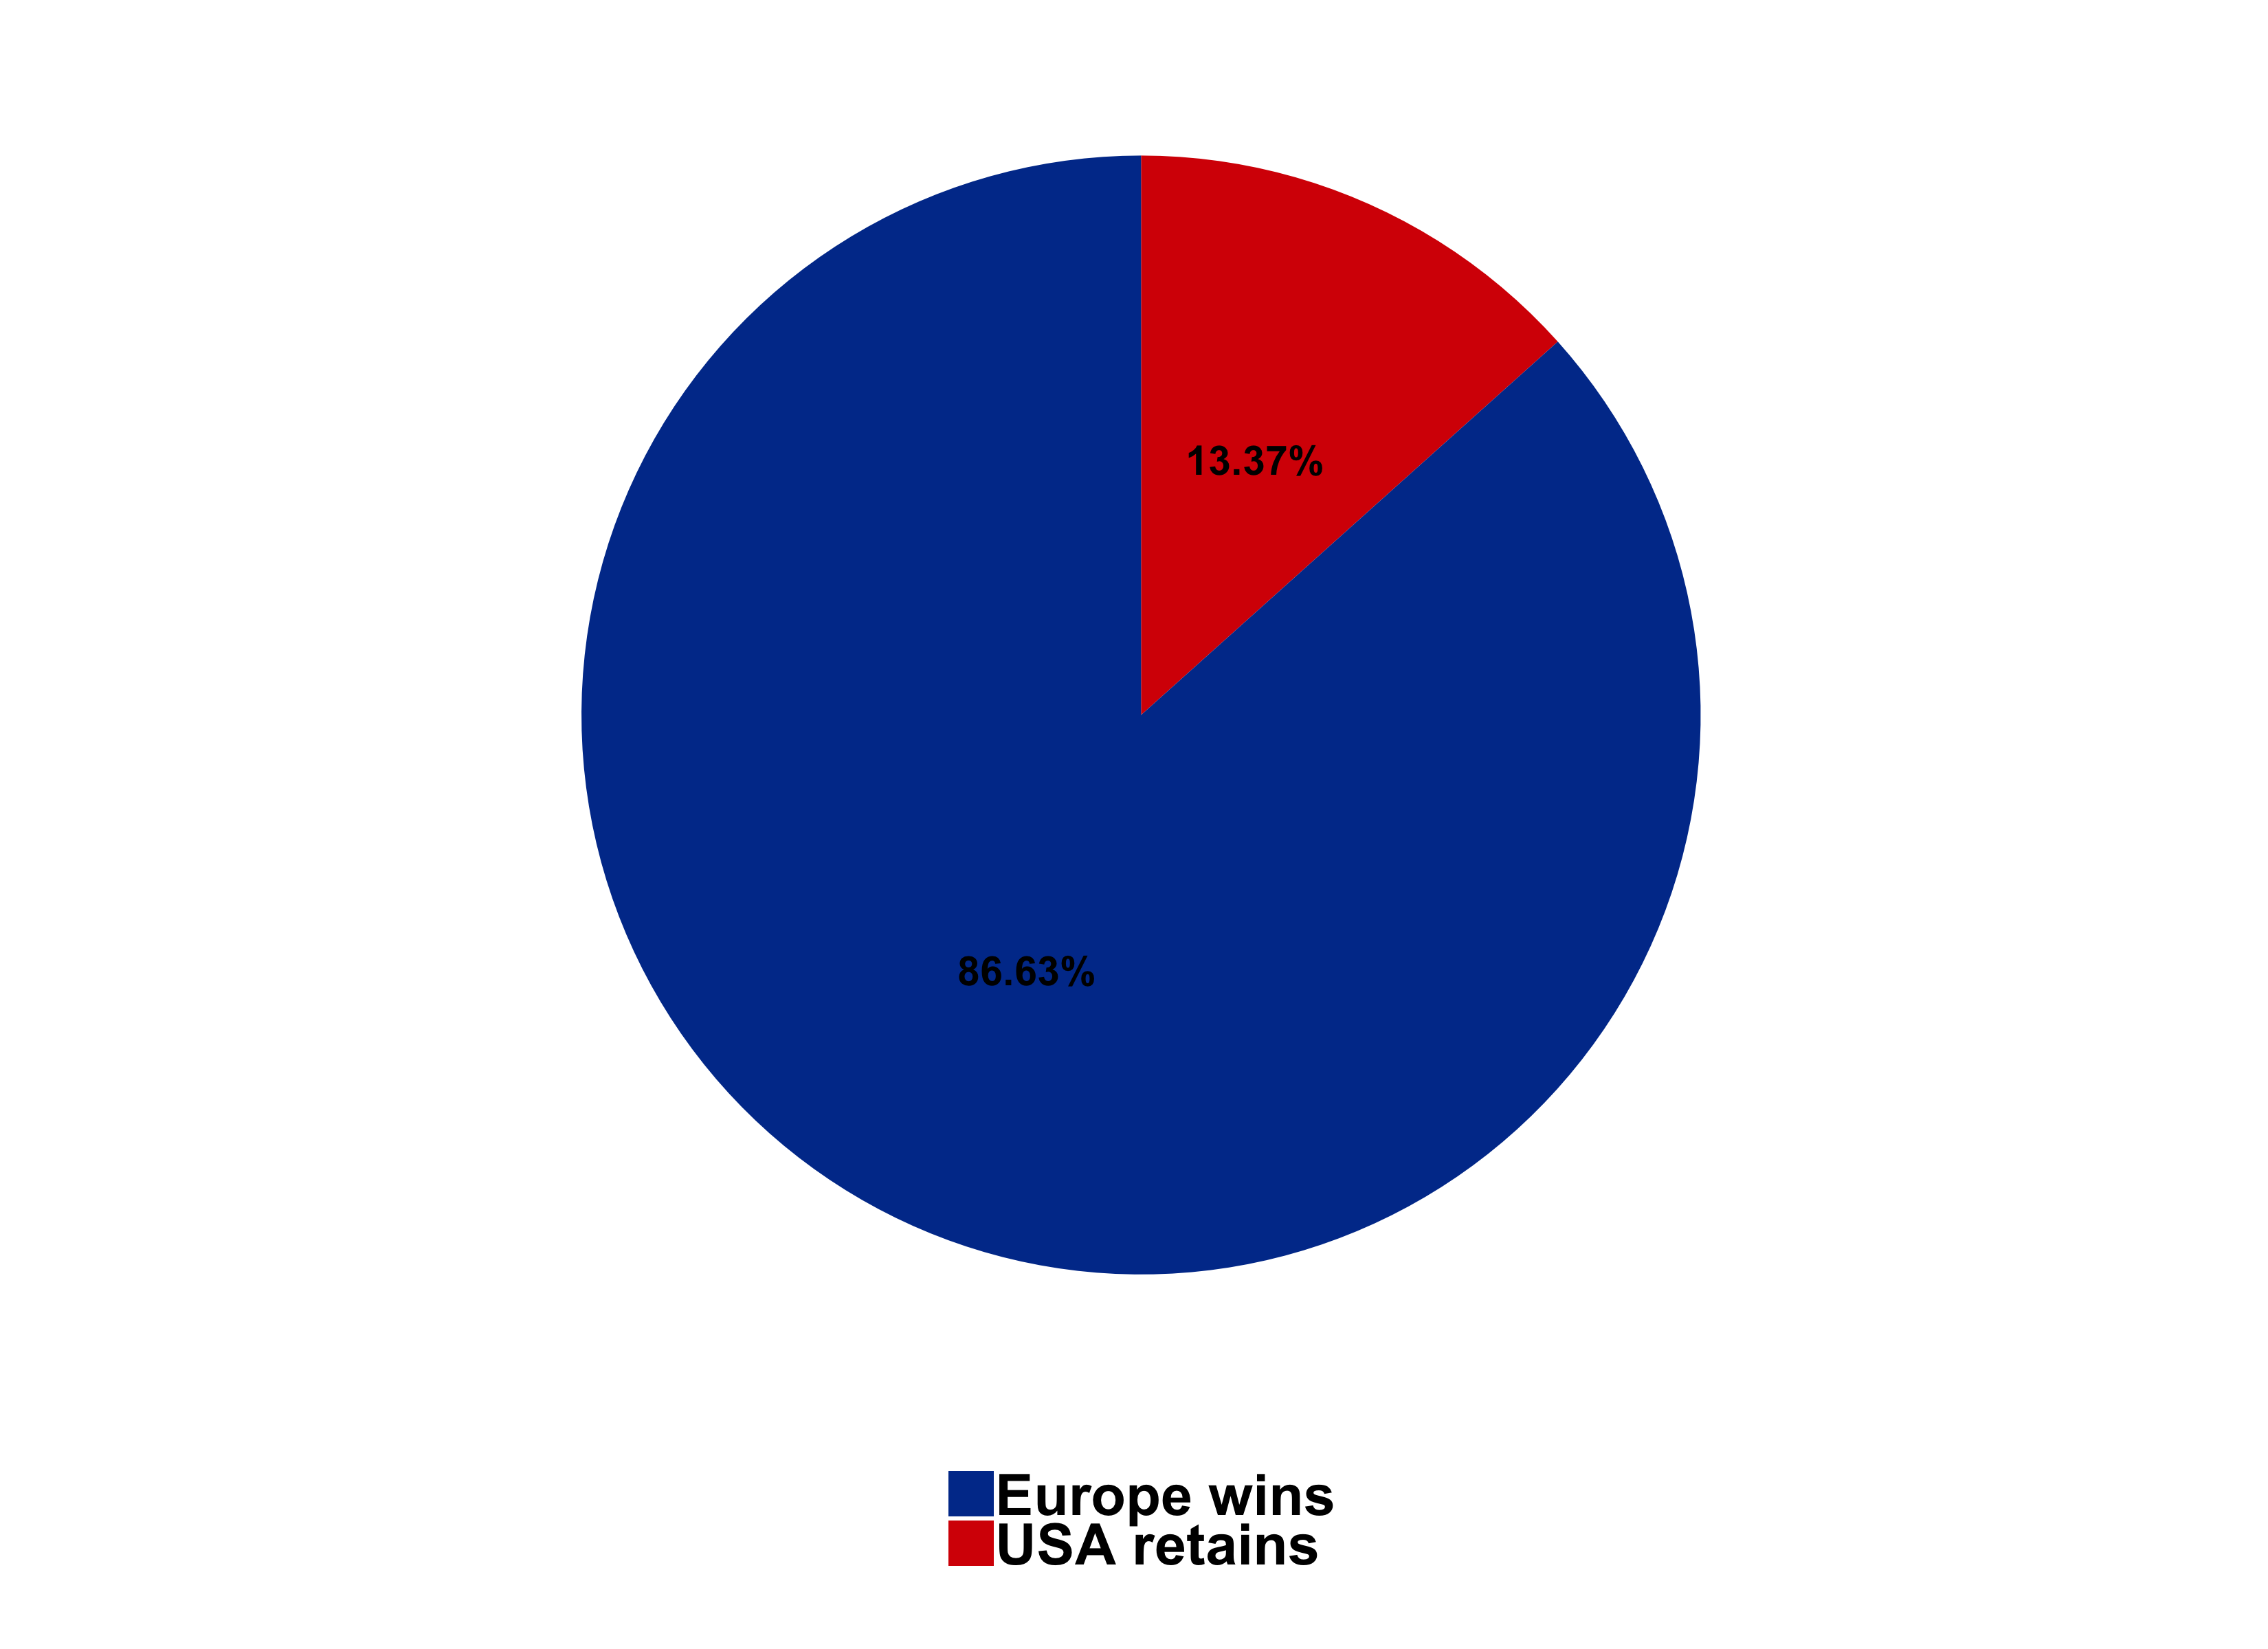 Probability of Victory for Europe and the USA before the singles